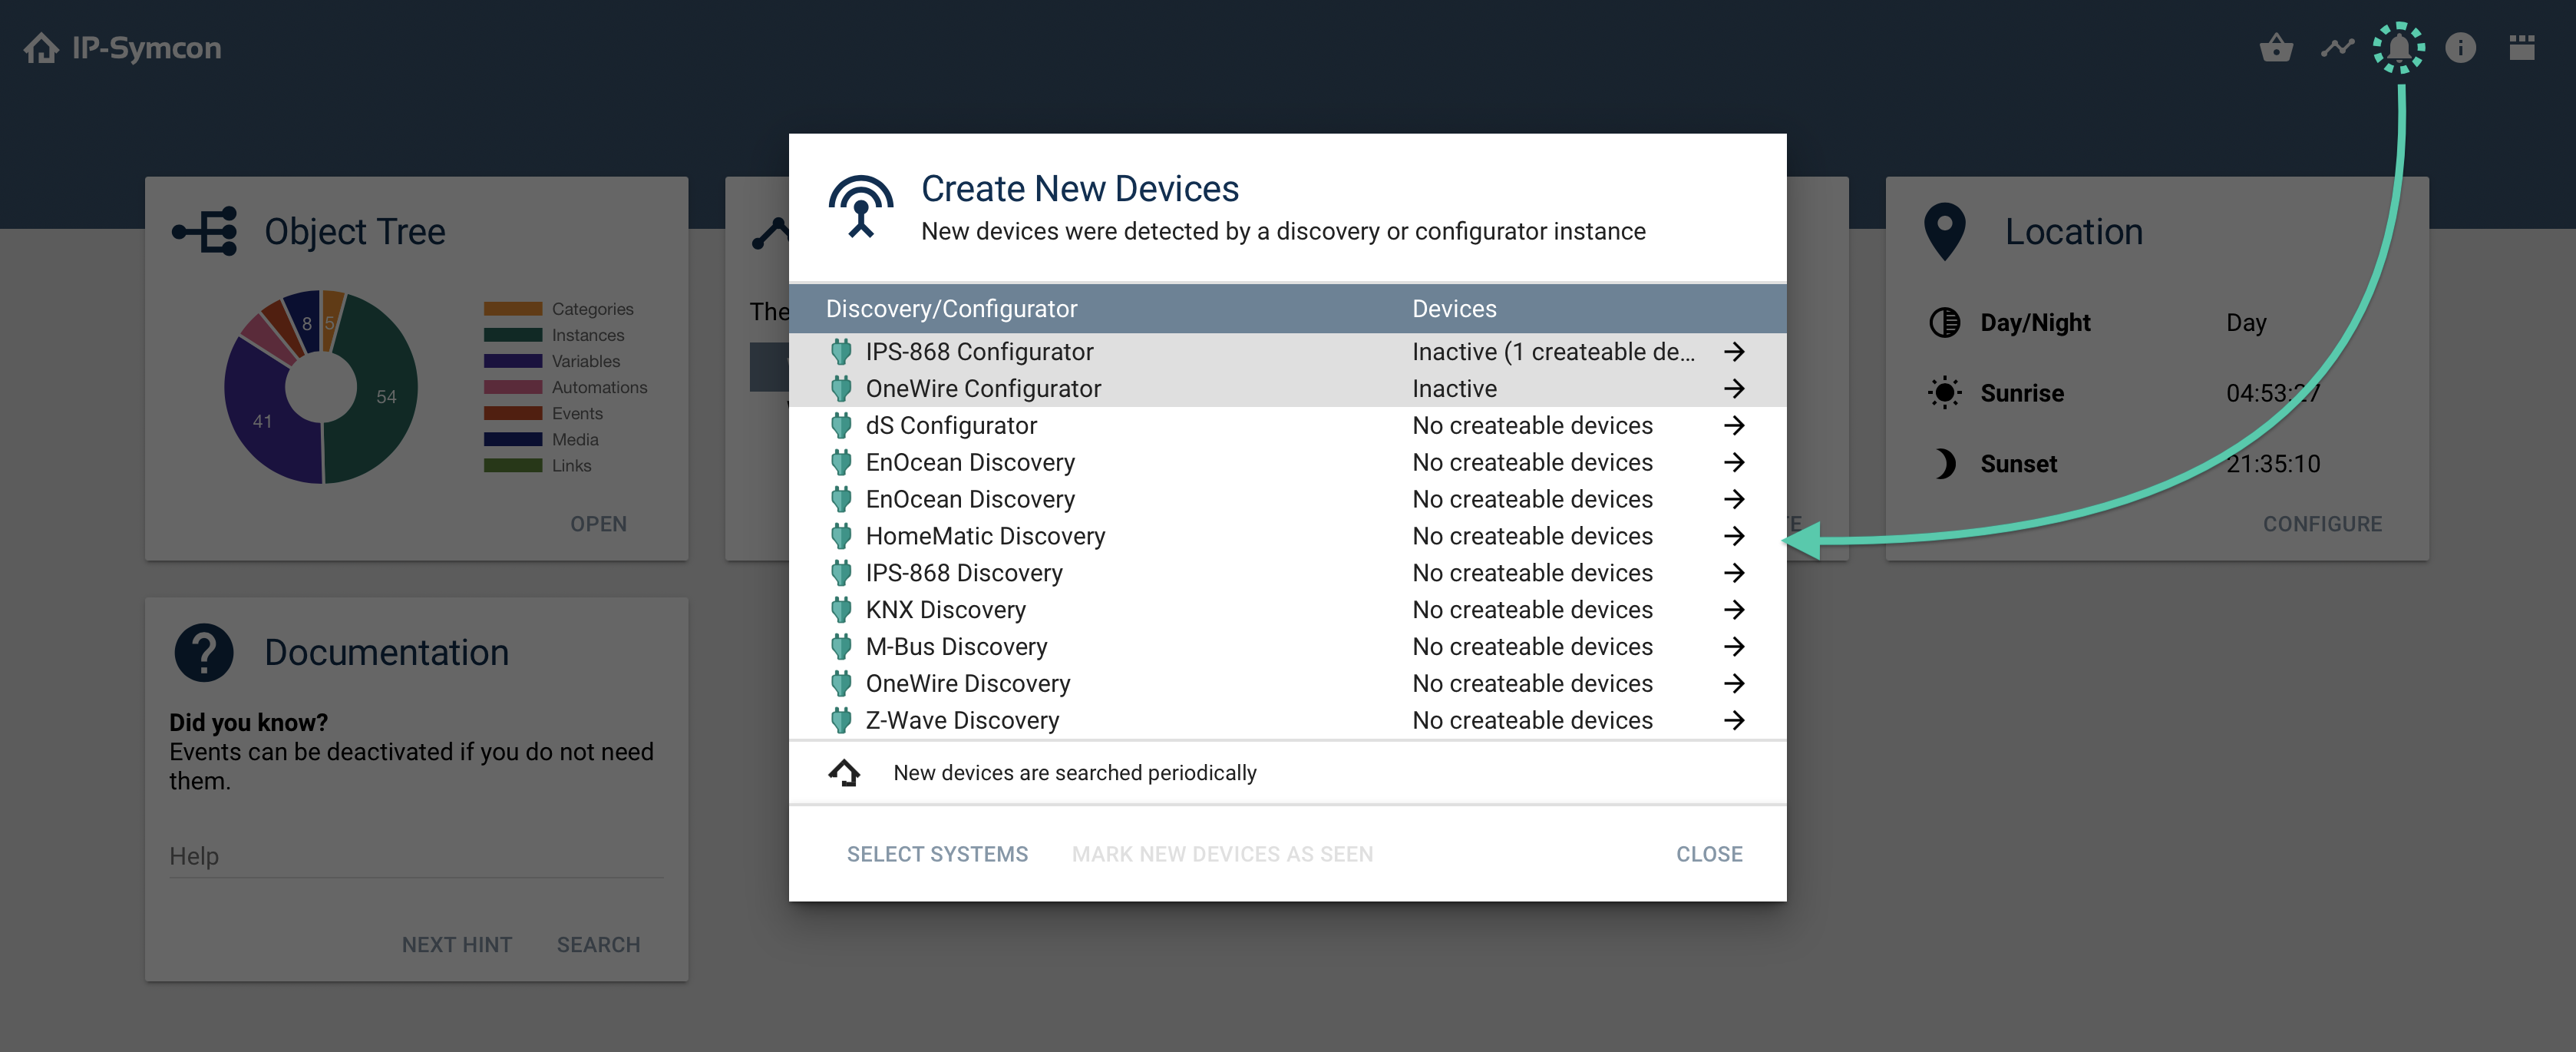 Open Device Search